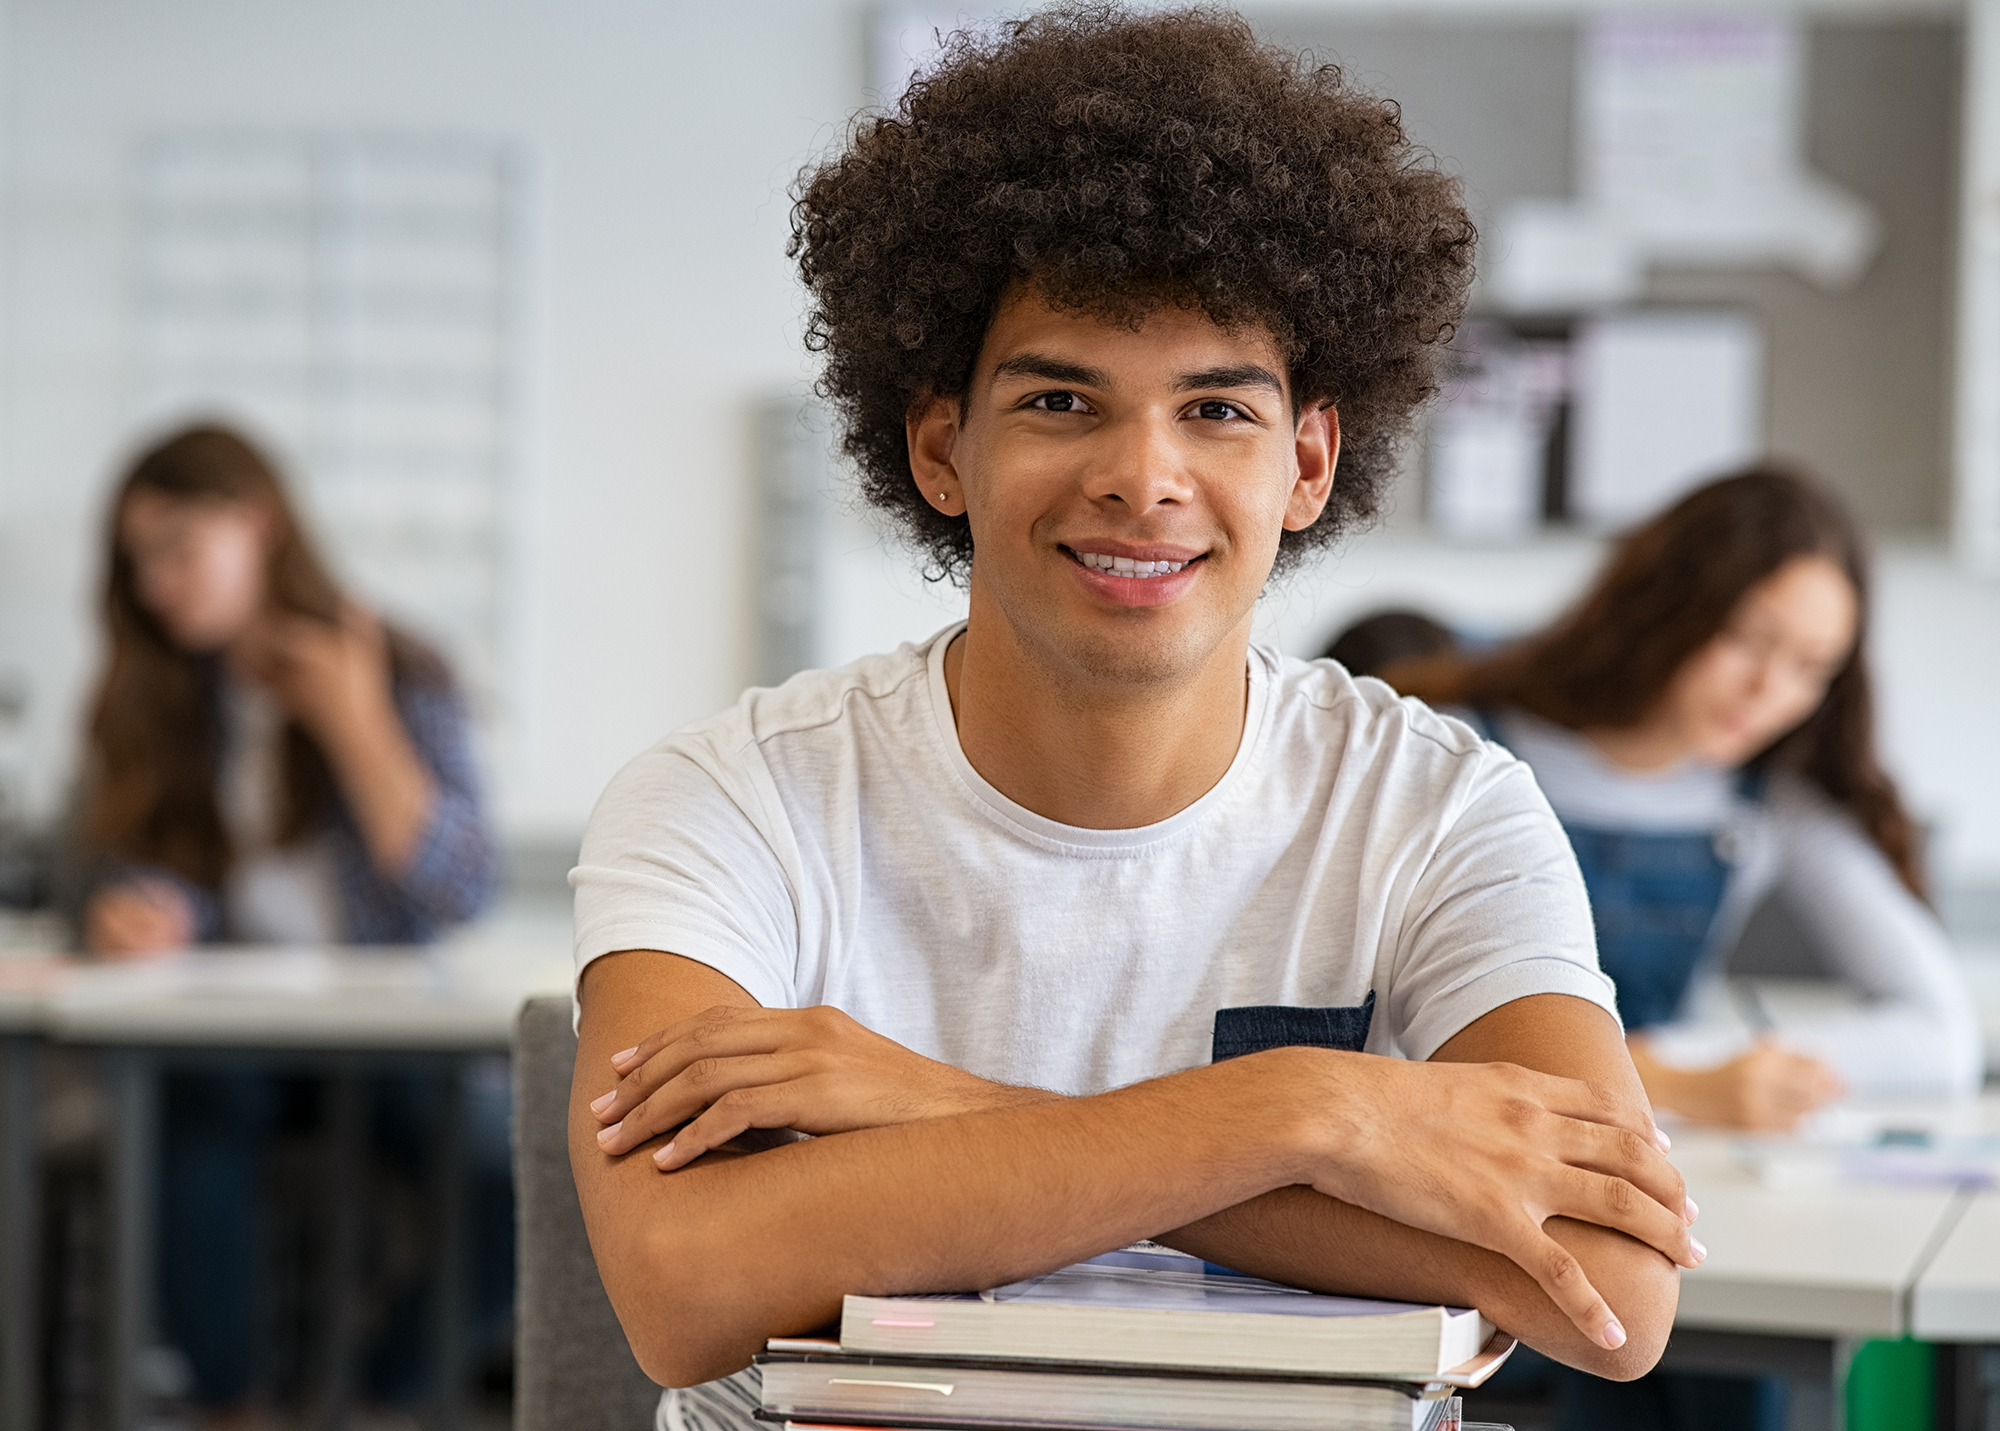 Portrait of happy student in class looking at camera. Smiling young man at college leaning on stack of books with classmates in background.